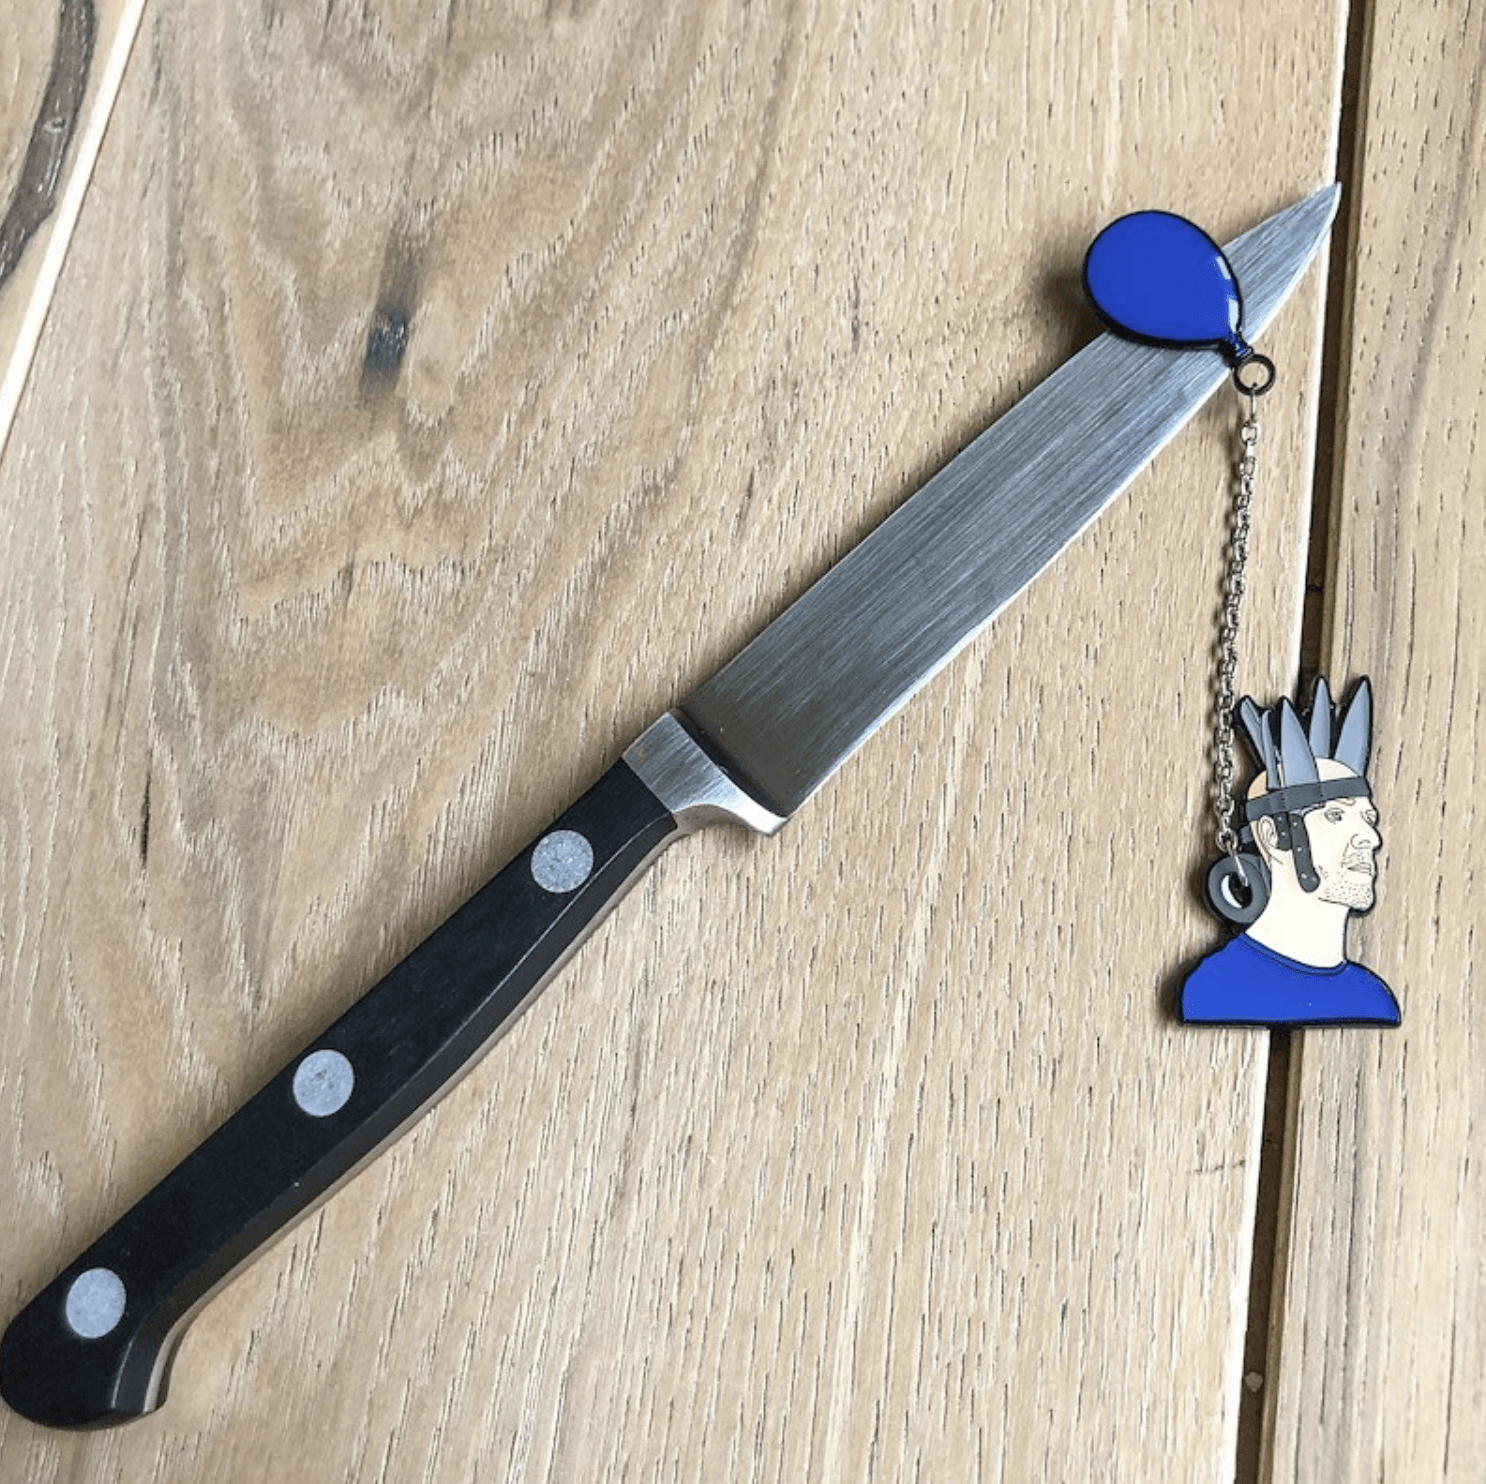 jan hakon erichson enamel pin with Jan wearing a blue shirt and  crown of duct taped knives with a blue balloon attatched to a chain goin through the duct tape roll.  the balloon of the pin is balanced on a kit hen knife. 